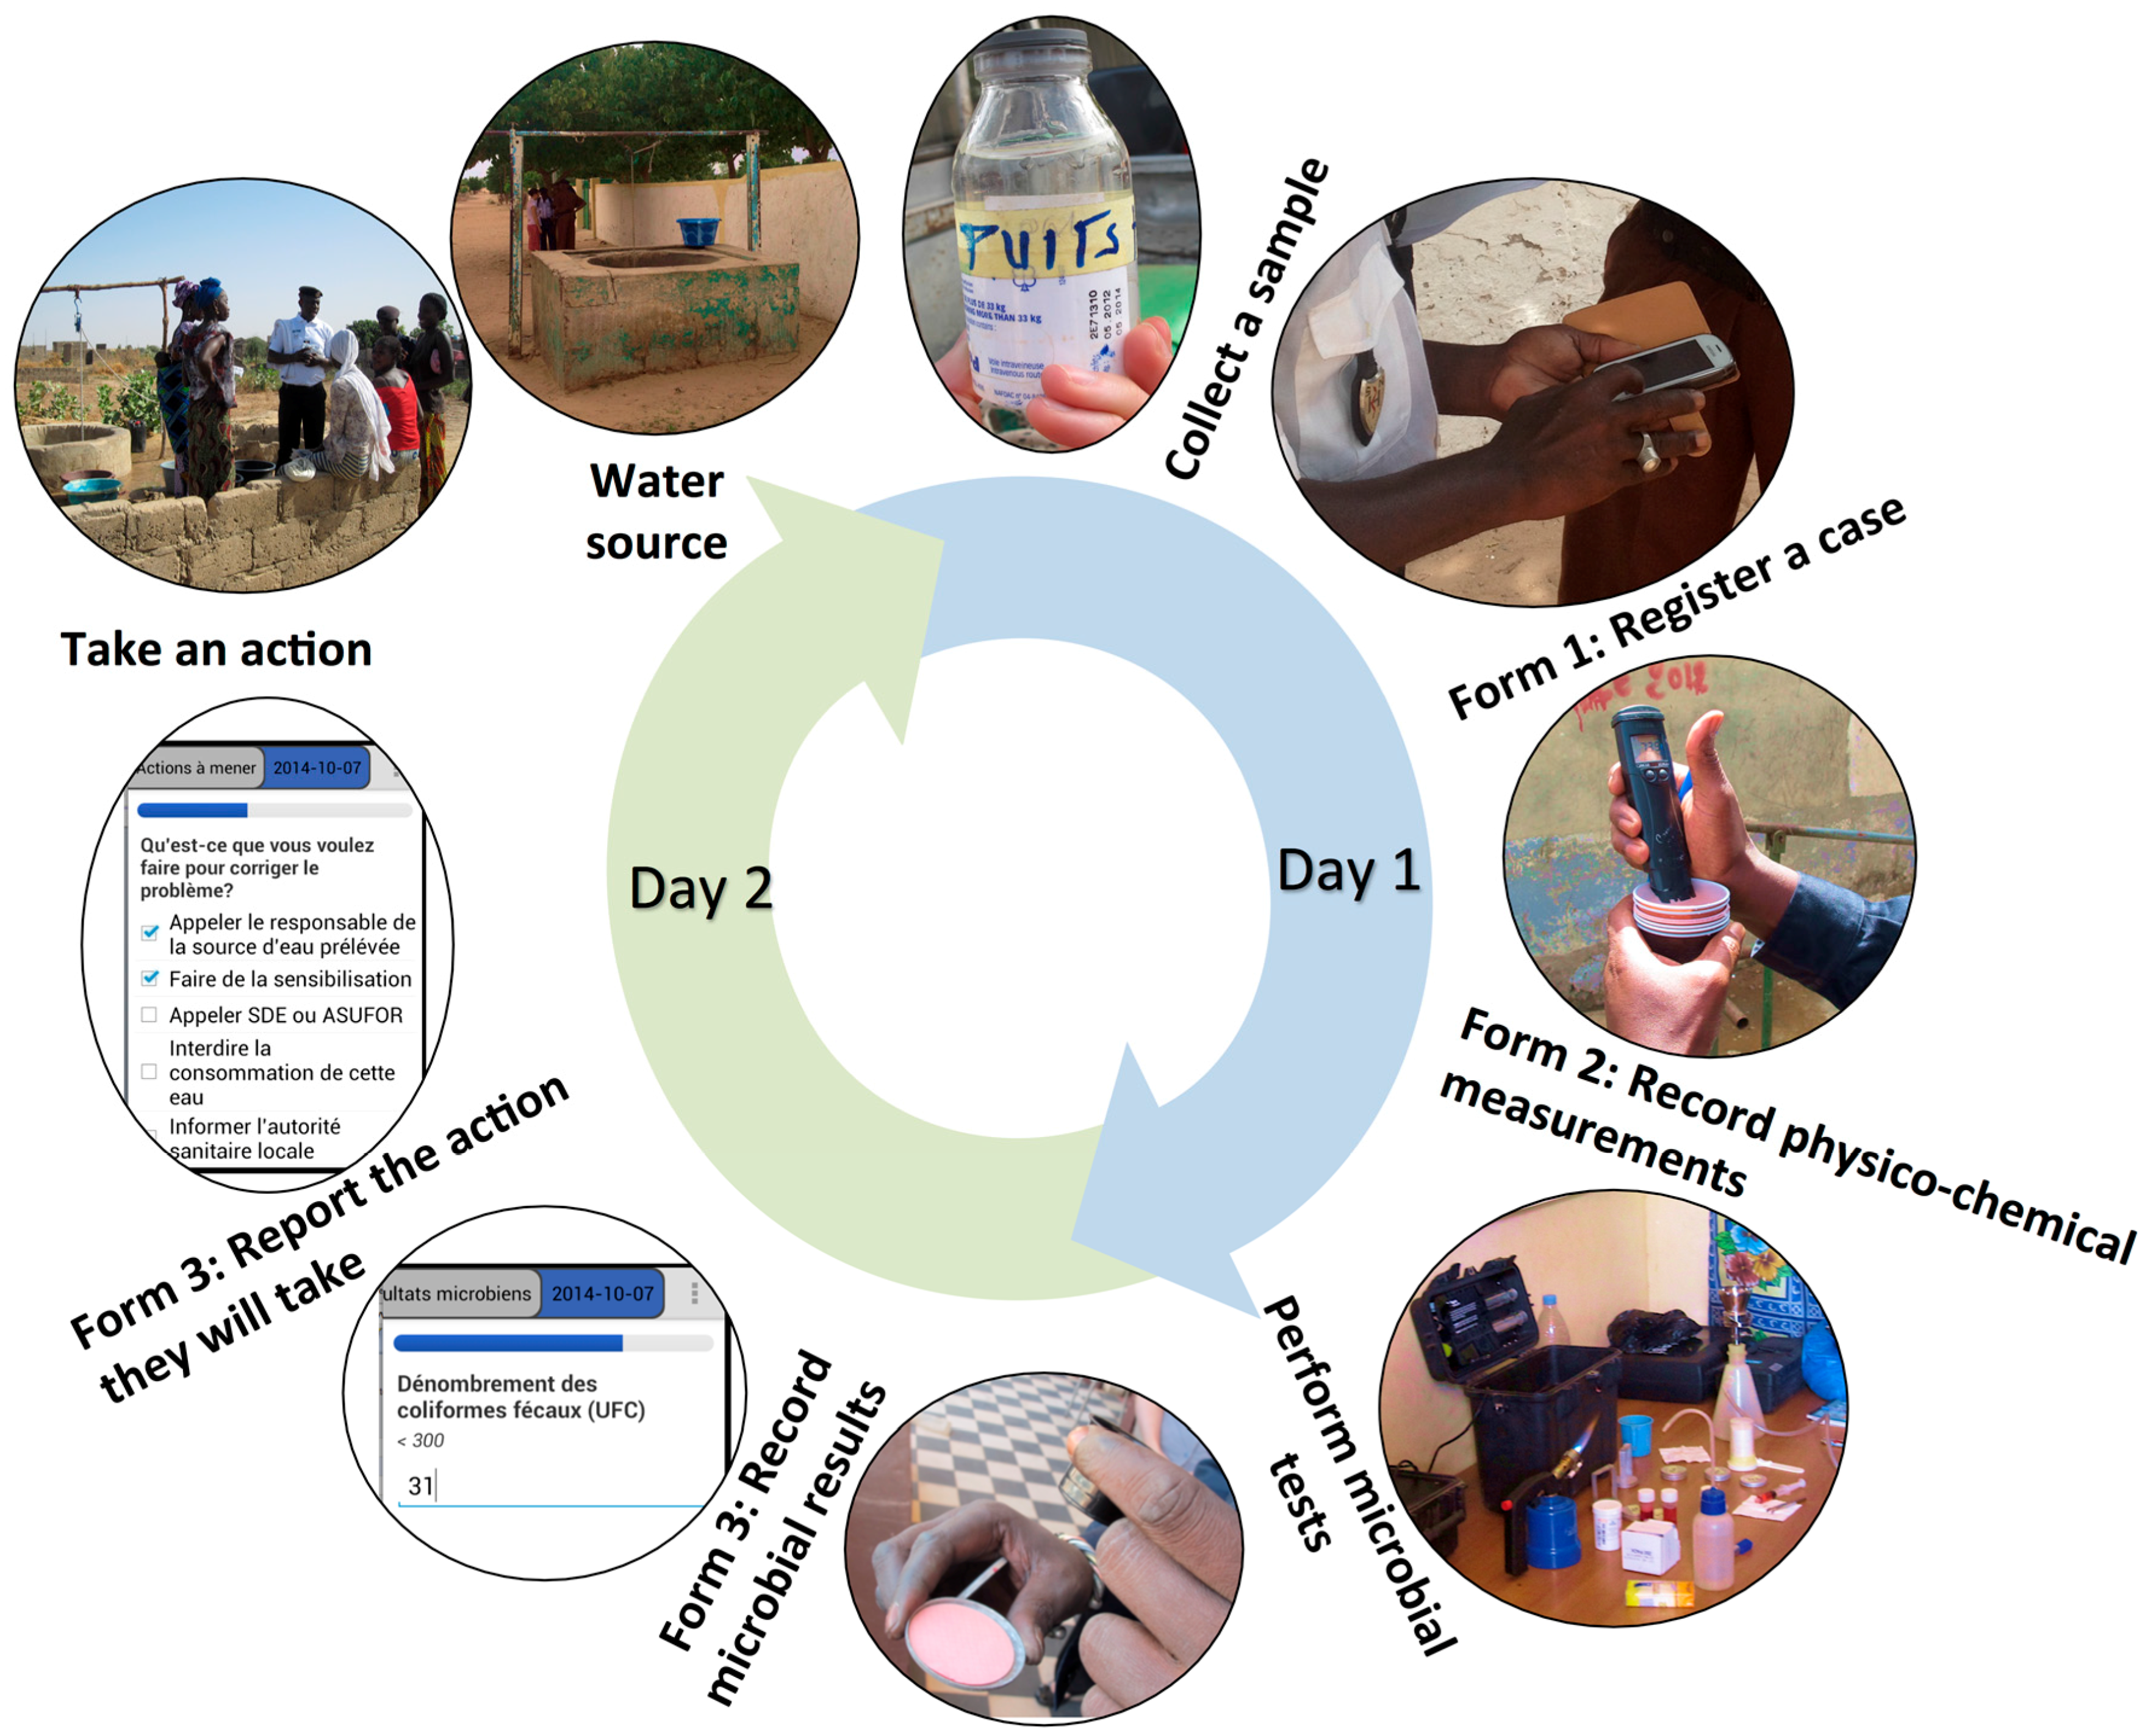 IJERPH | Free Full-Text | When Are Mobile Phones Useful for Water Quality  Data Collection? An Analysis of Data Flows and ICT Applications among  Regulated Monitoring Institutions in Sub-Saharan Africa